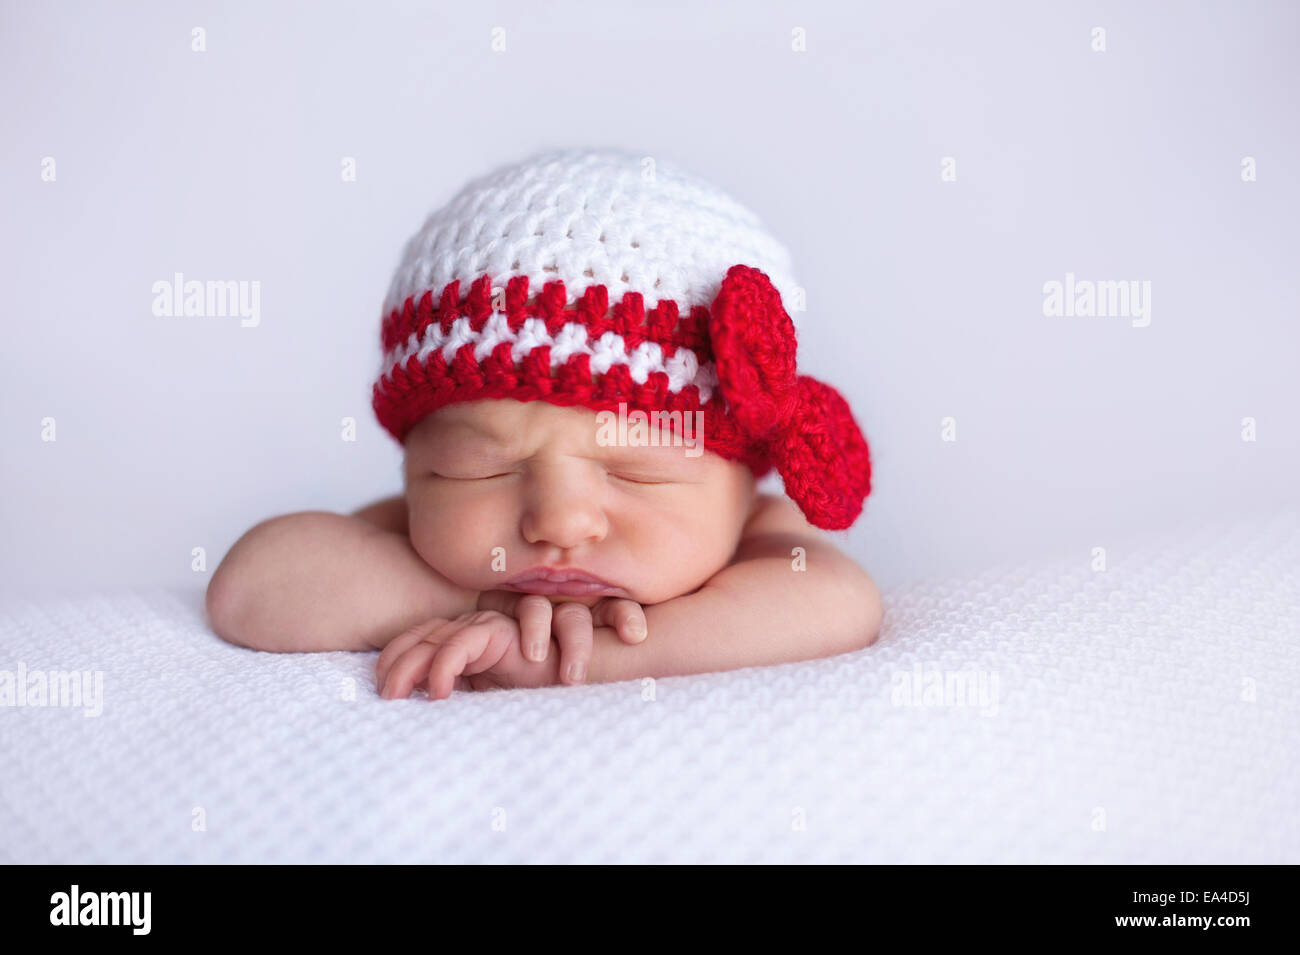 Portrait of a seven day old newborn baby girl. She is wearing a white and red crocheted hat and is sleeping on white, textured m Stock Photo